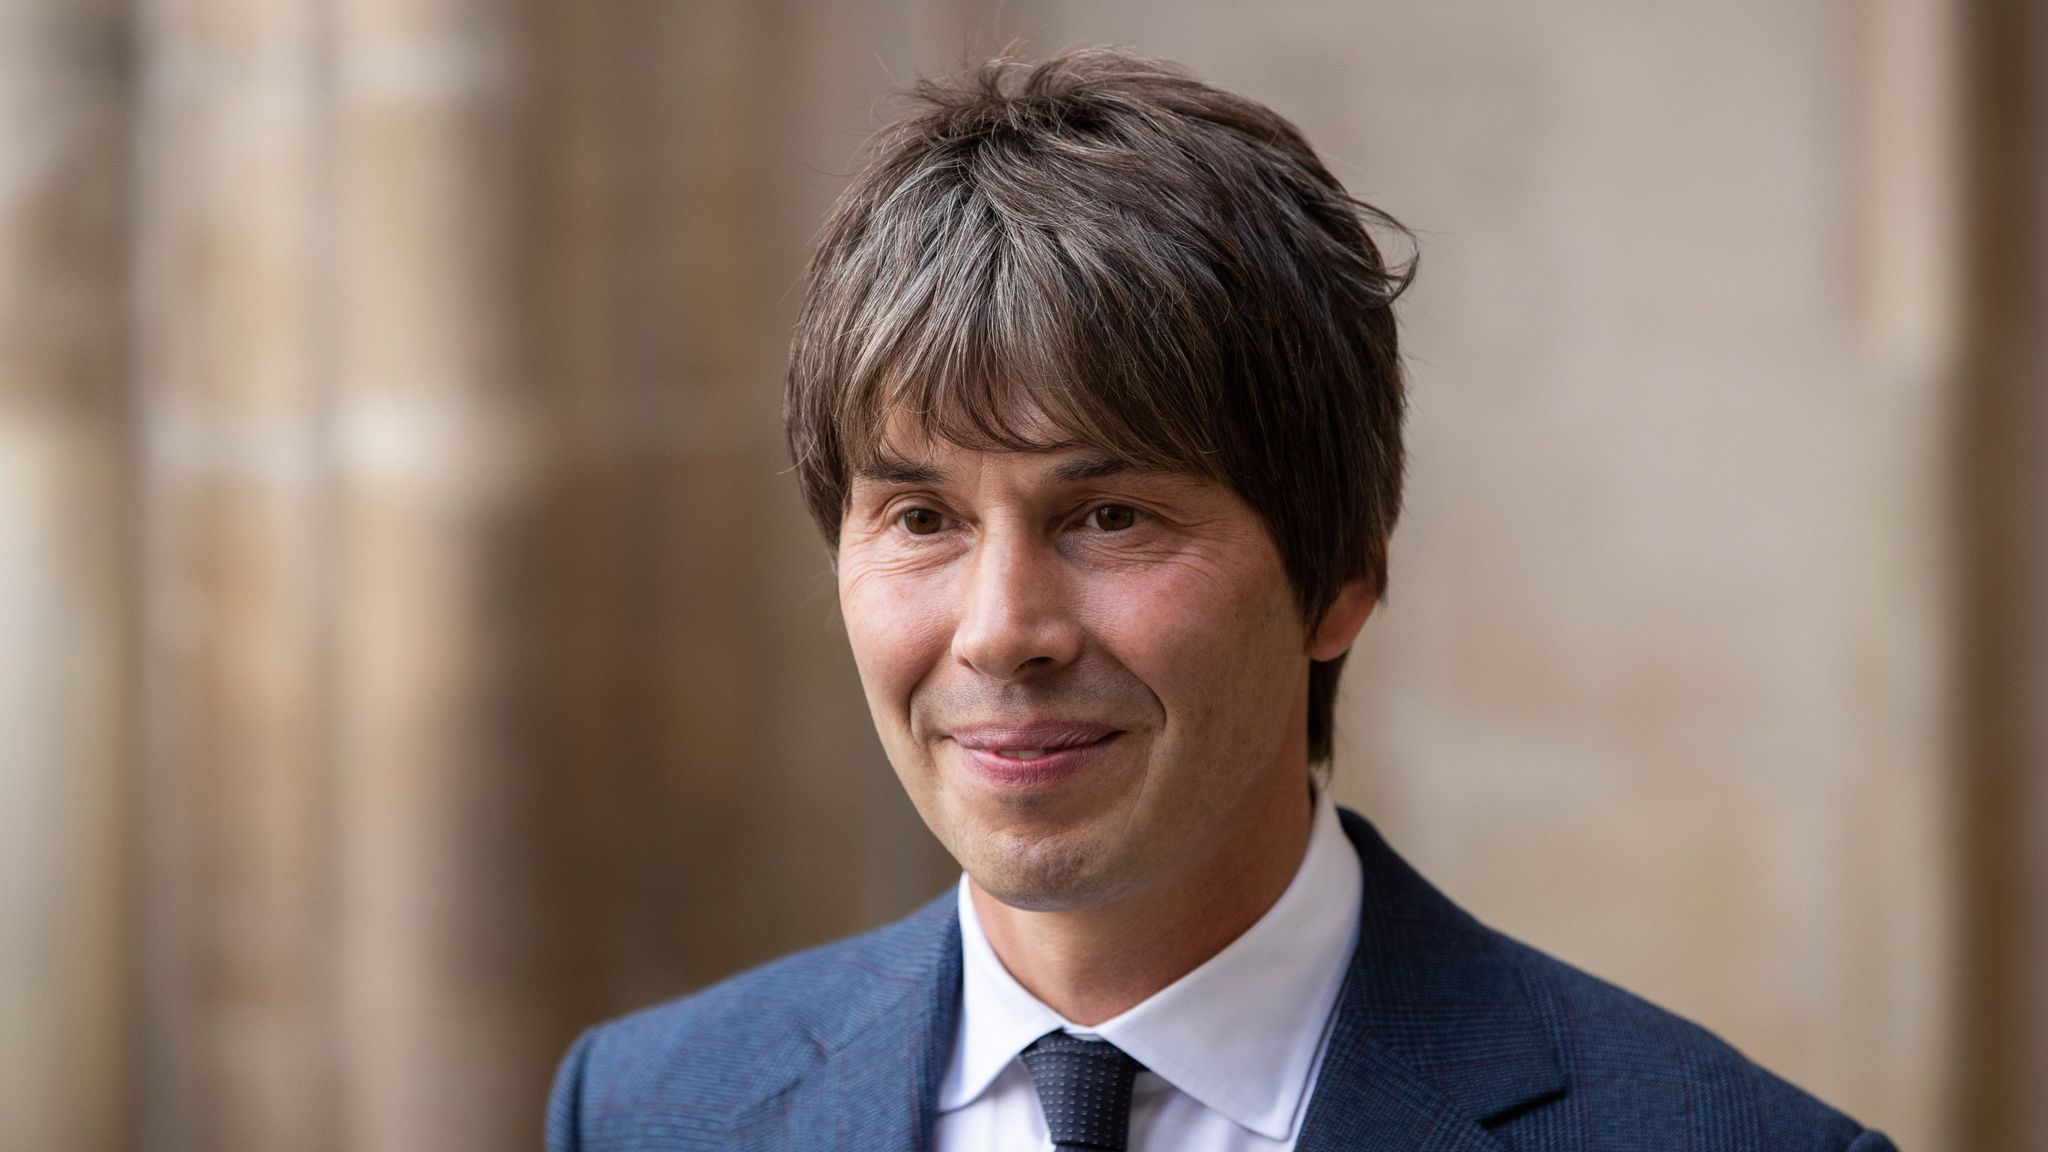 Coronavirus Professor Brian Cox Says Trust In Science Could Be Eroded If Misused By Politicians Uk News Sky News